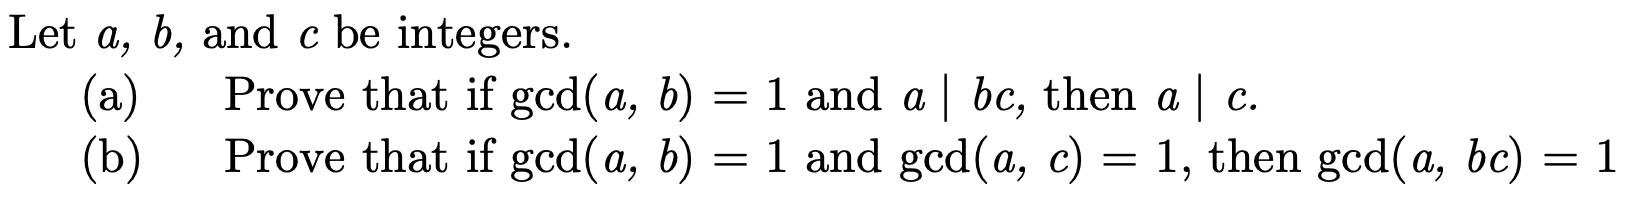 |Let a, b, and c be integers.
Prove that if gcd(a, b)
| bc, then a |
1 and gcd(a, c)
1 and a
(a)
C.
Prove that if gcd(a, b)
(b)
1, then gcd(a, bc) = 1
